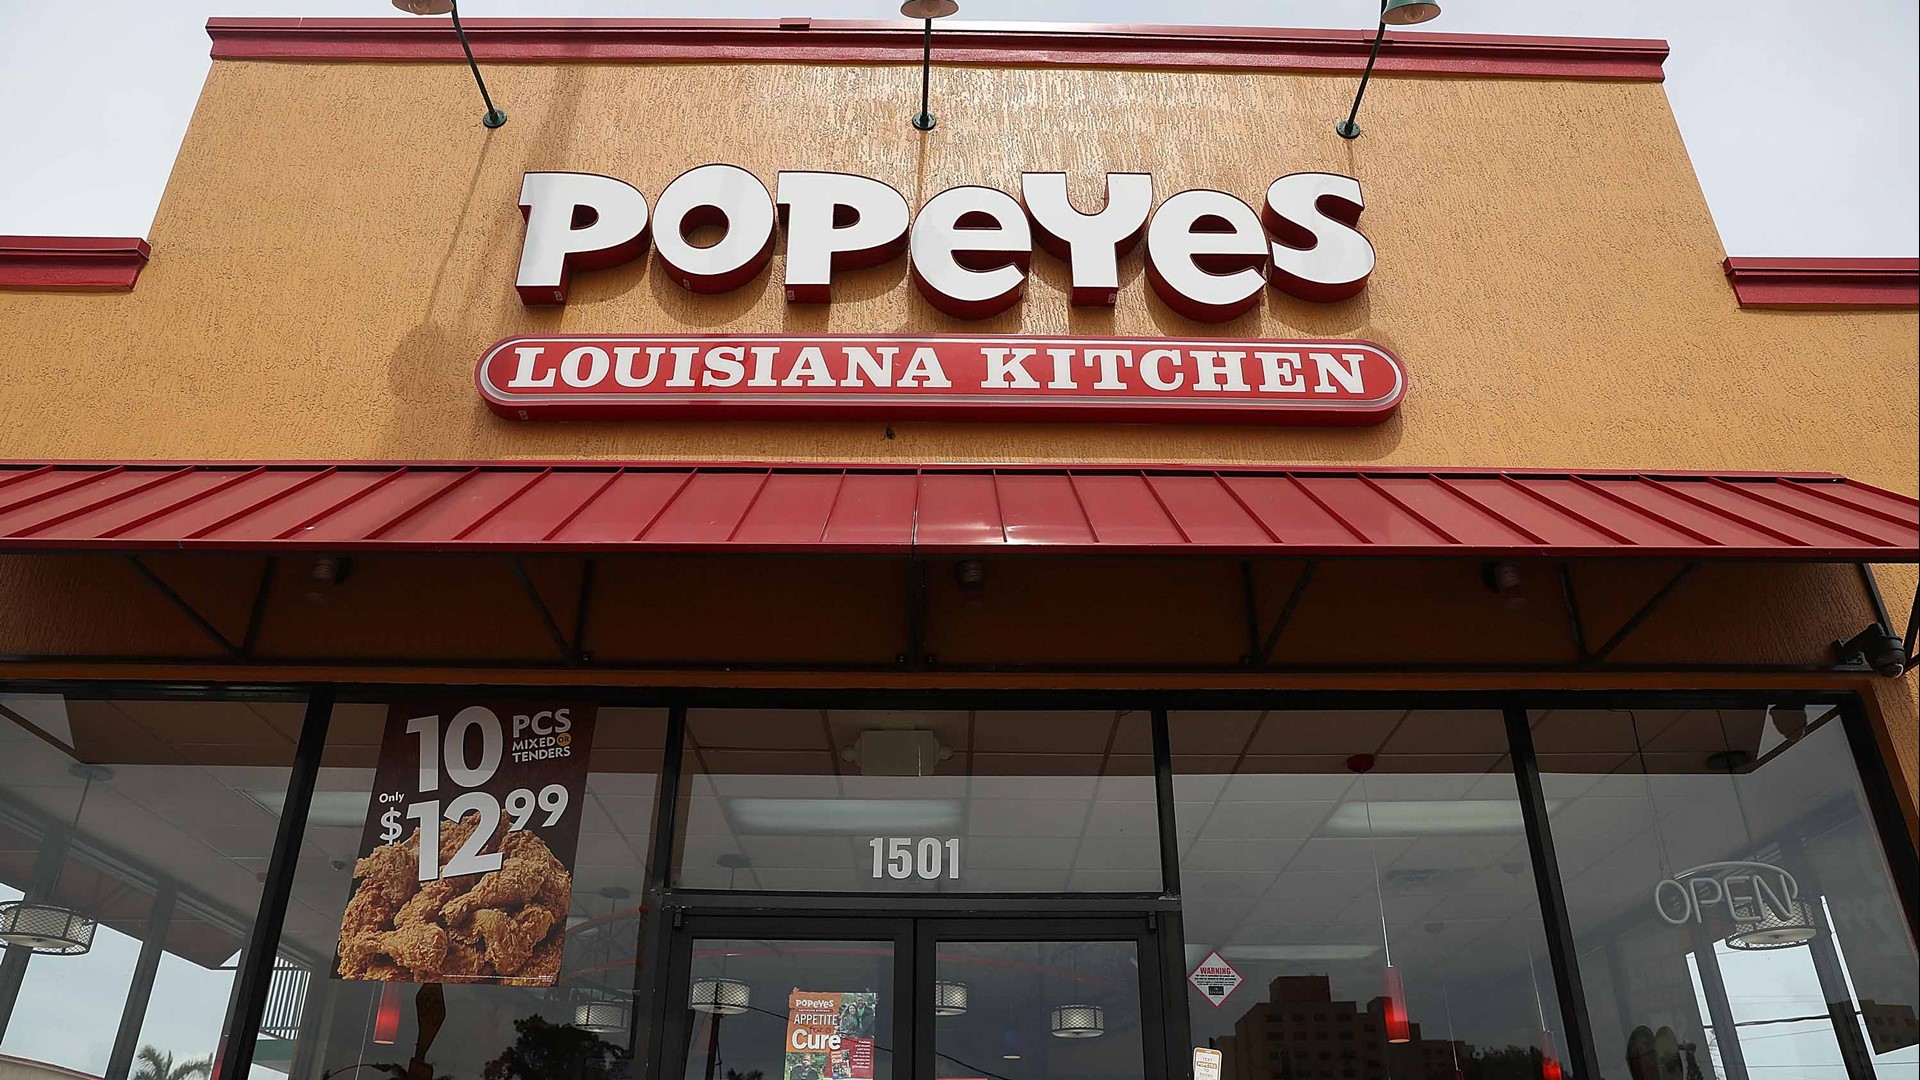 On Friday, August 23, at 2:34 a.m., Little Rock police officers responded to a robbery call at Popeyes on South University.